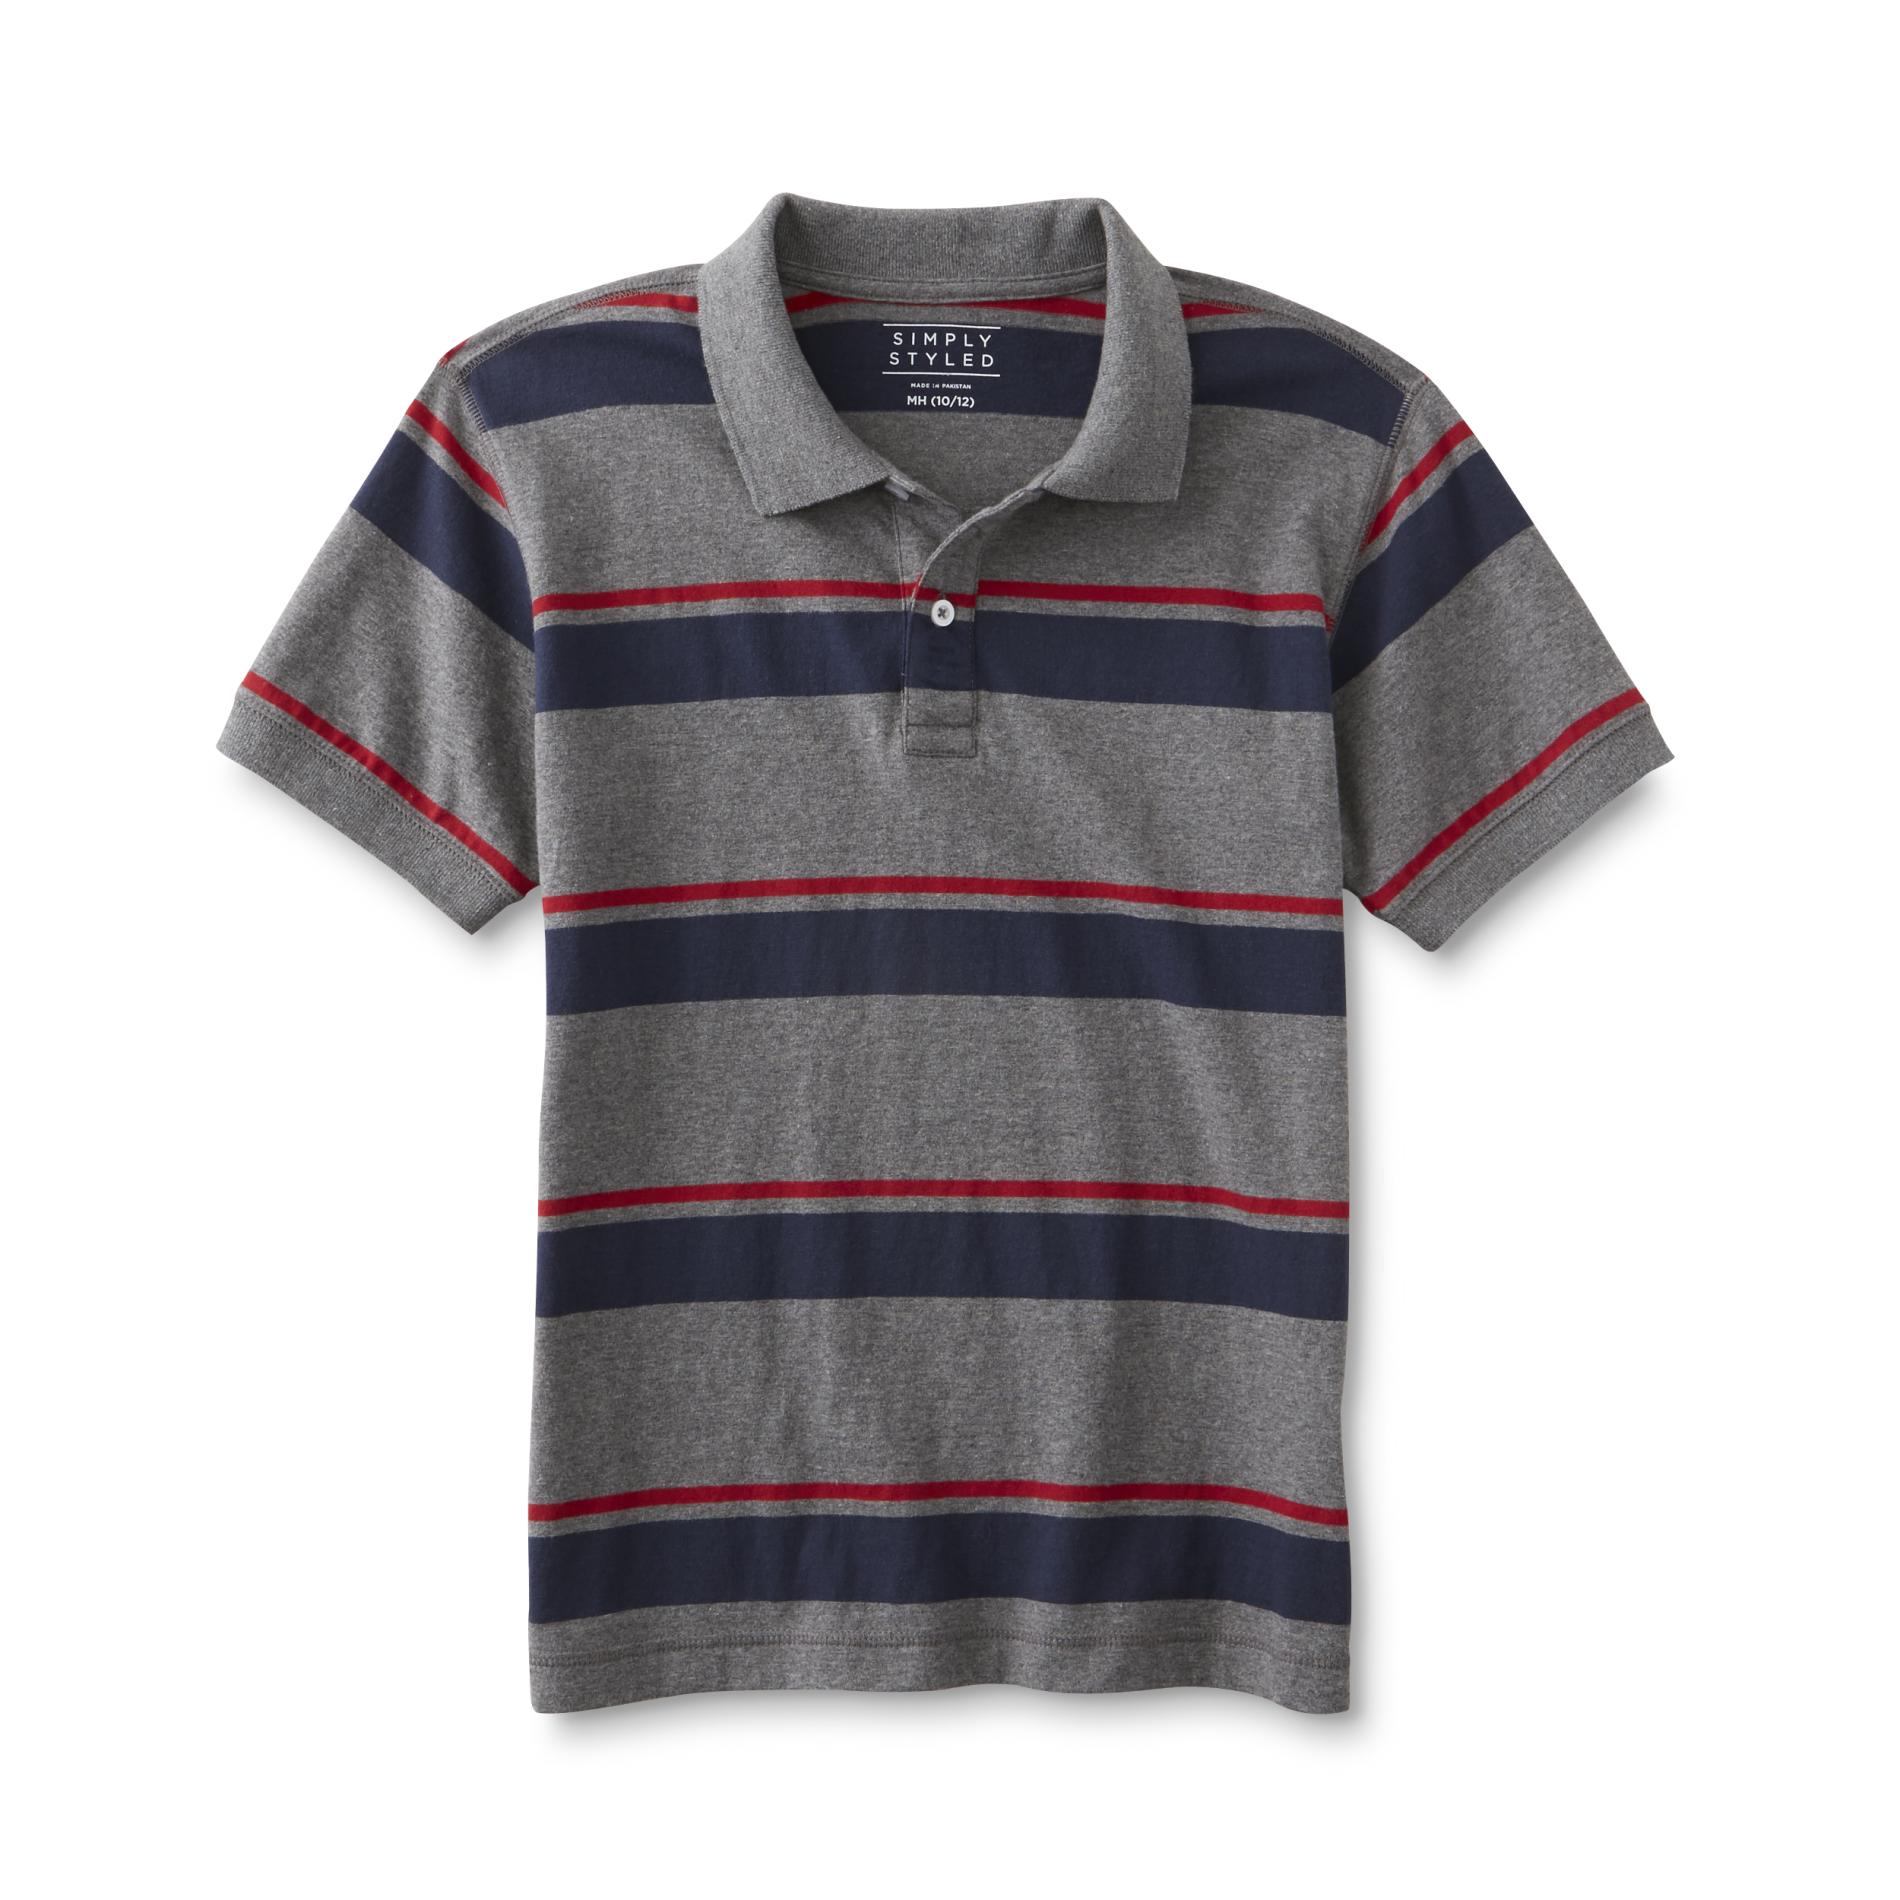 Simply Styled Boy's Polo Shirt - Striped